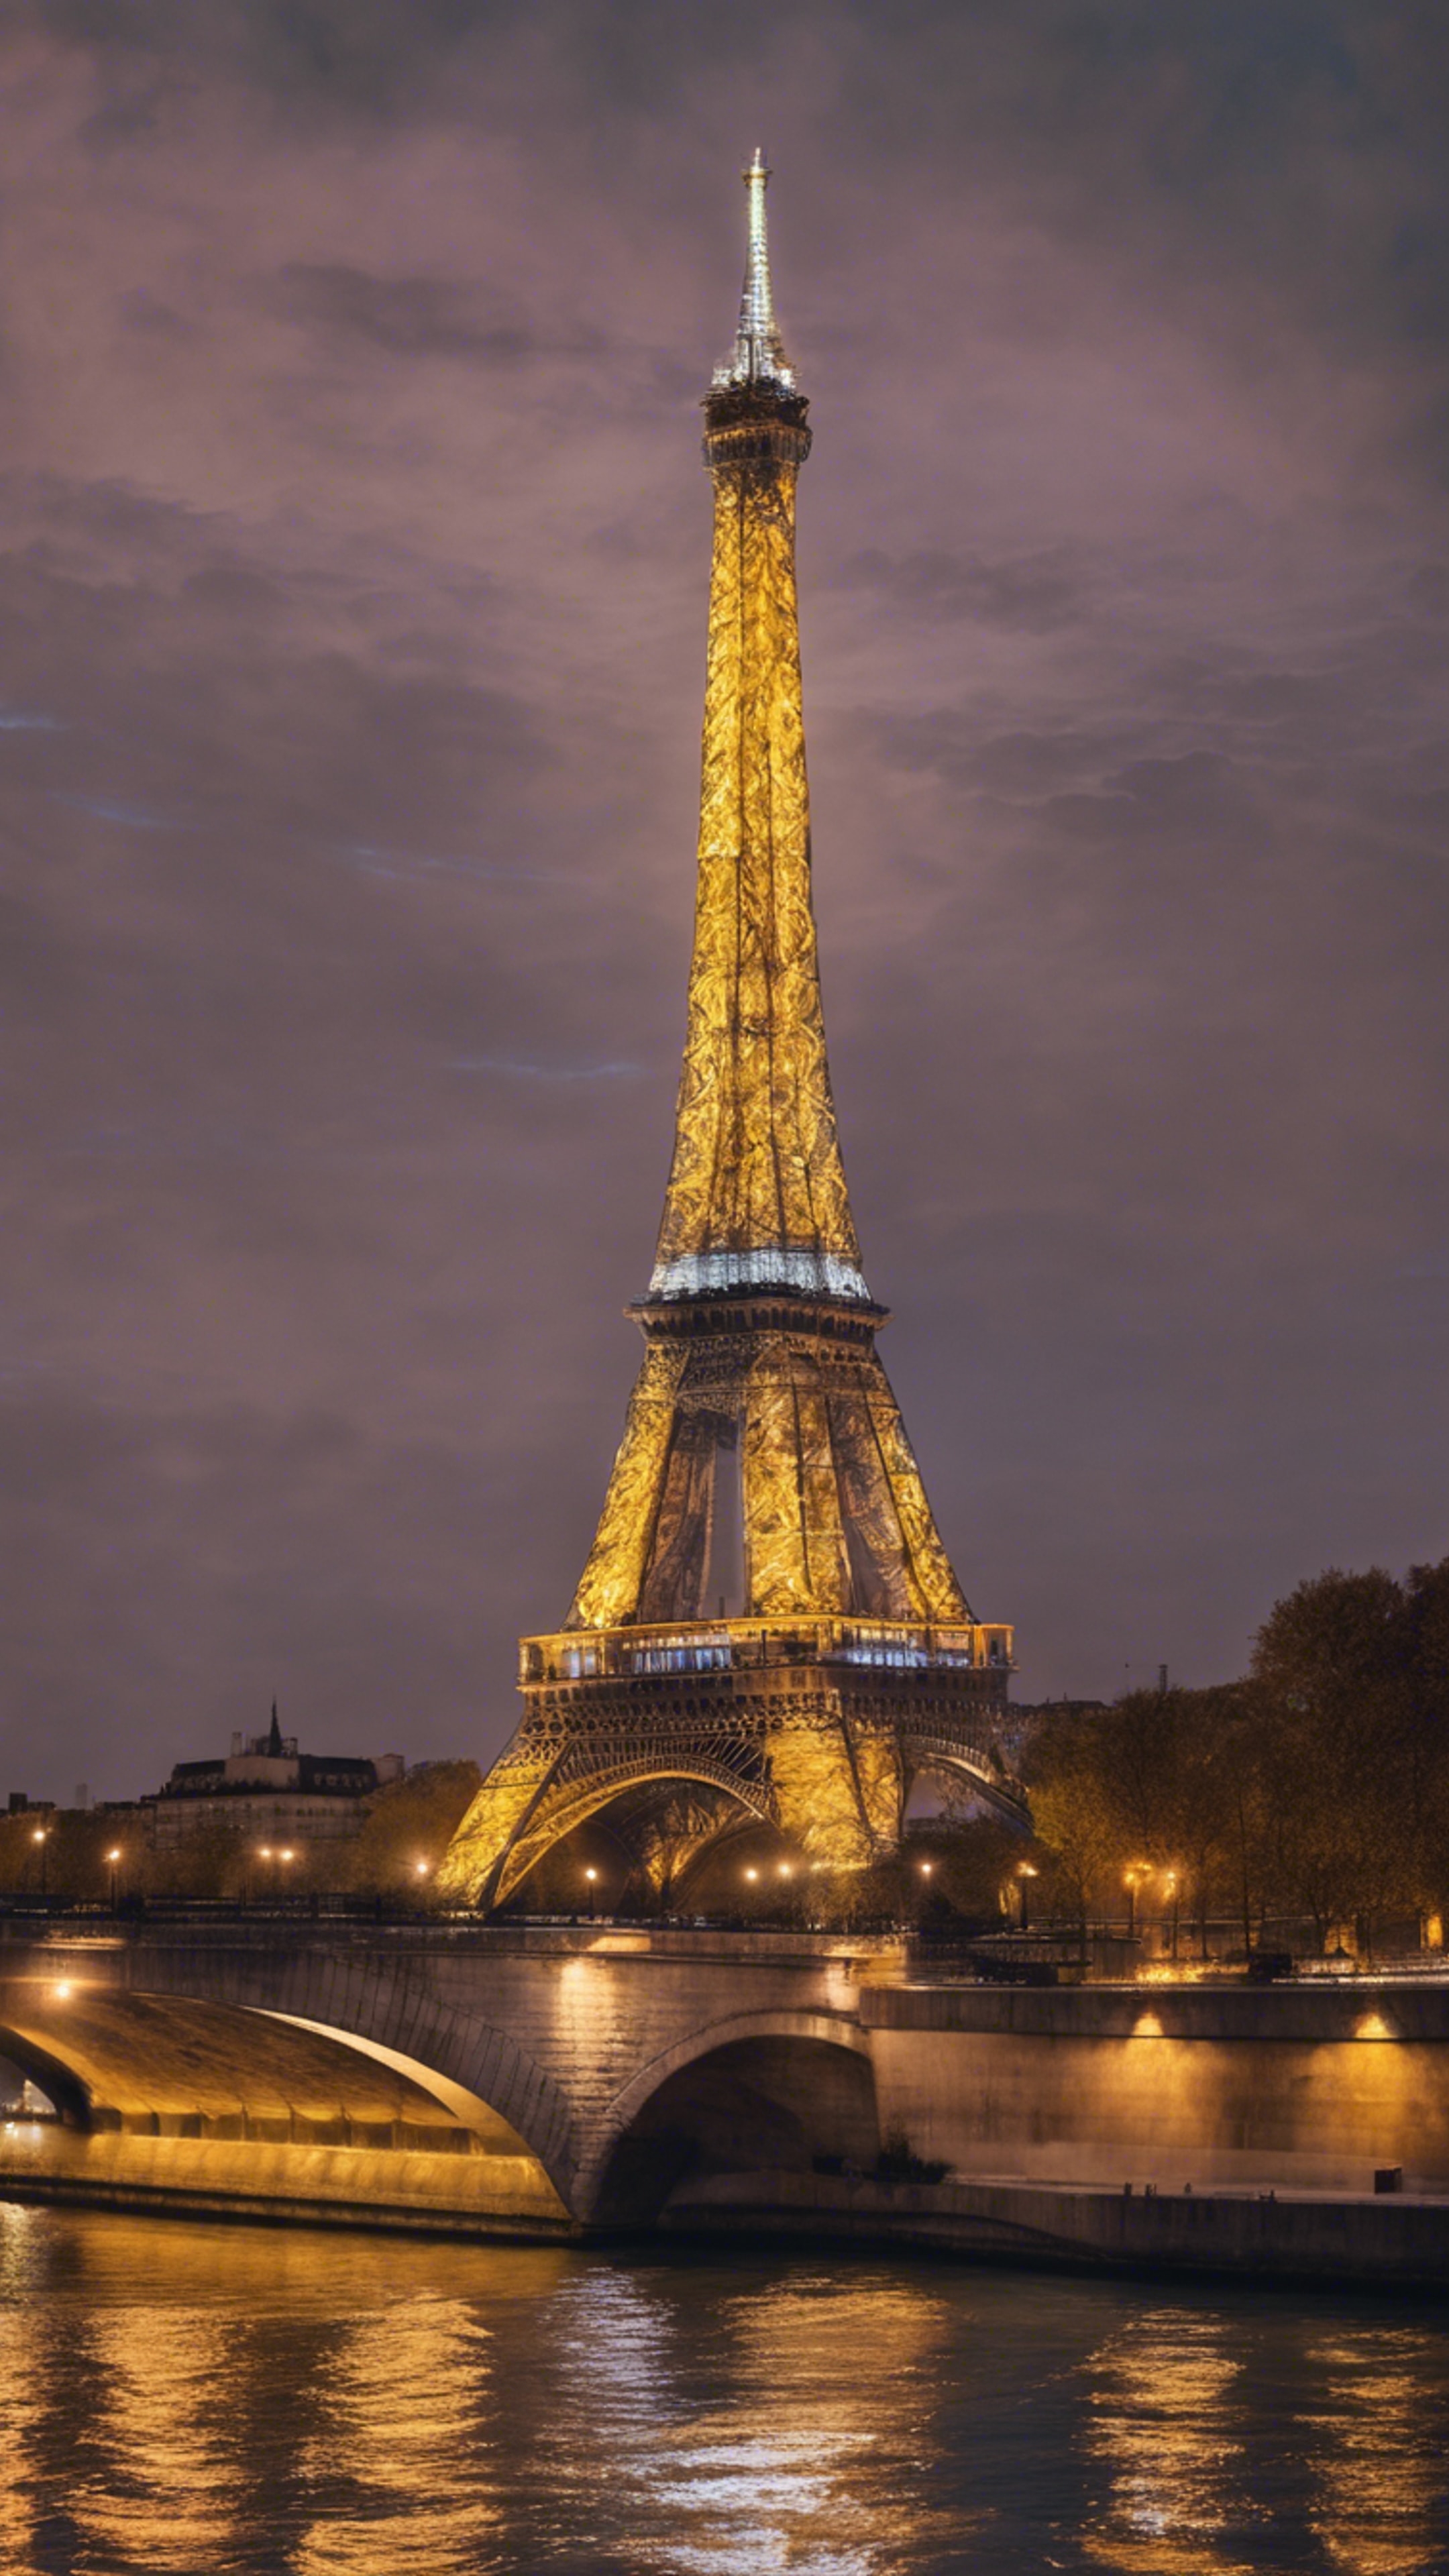 Eiffel tower illuminated against the Paris skyline at night, reflecting in the smooth waters of the river Seine. Тапет[bfd7e83086d14adeb14c]